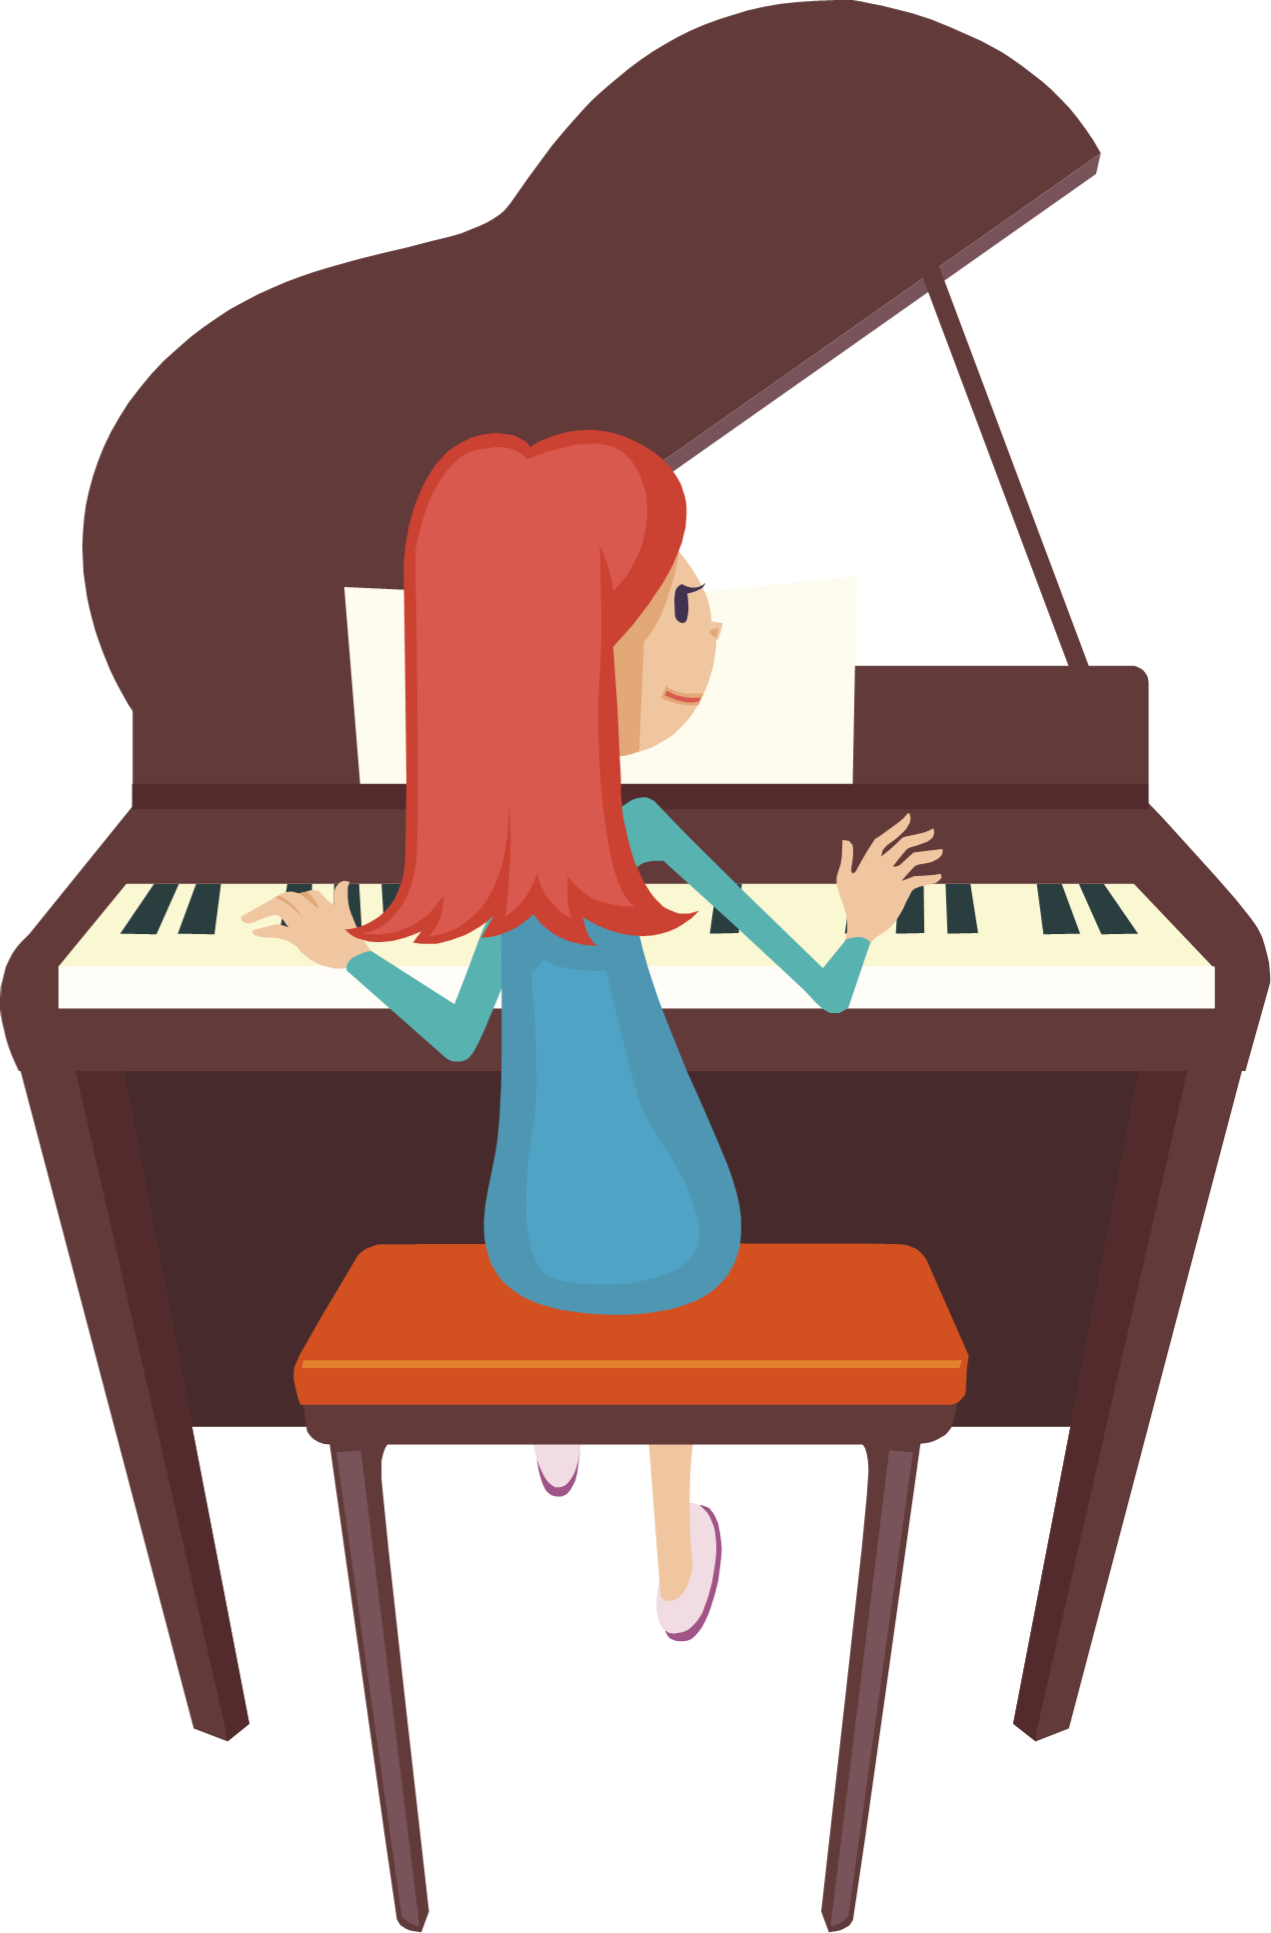 Playing Piano Clipart | Clipart Panda - Free Clipart Images